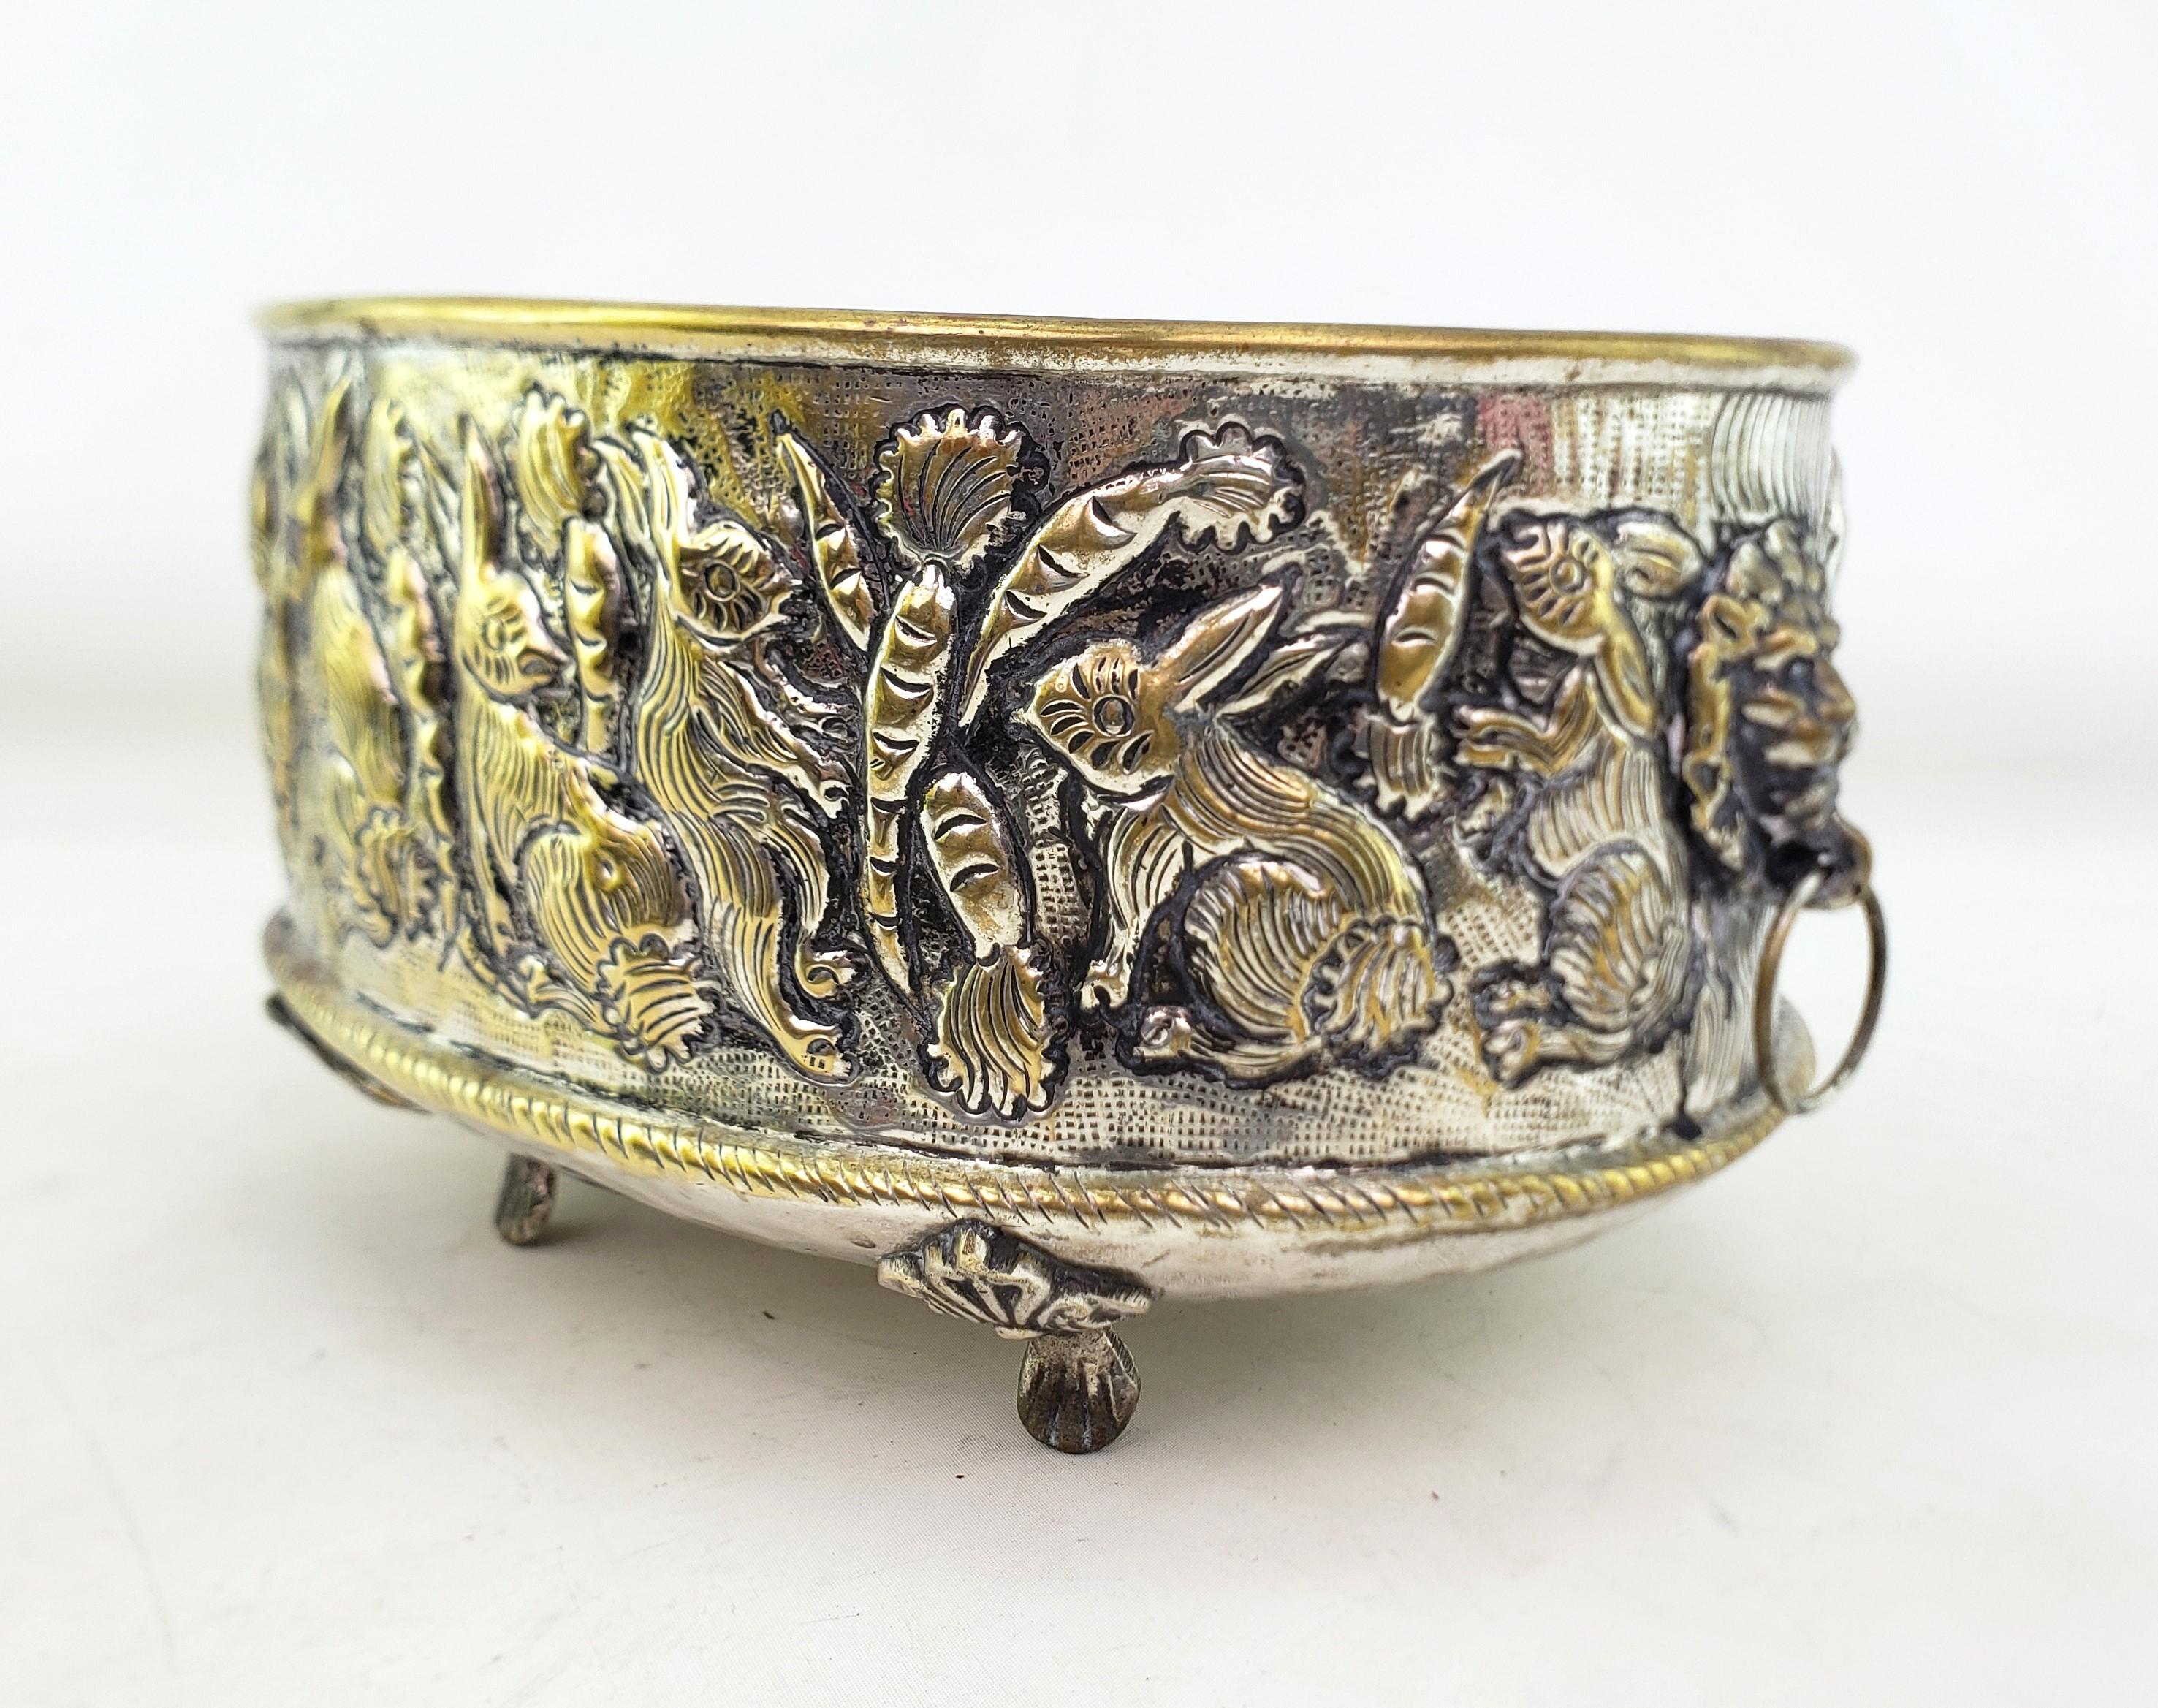 Antique English Hand-Crafted Plated Brass Planter with Whimsical Rabbits For Sale 3